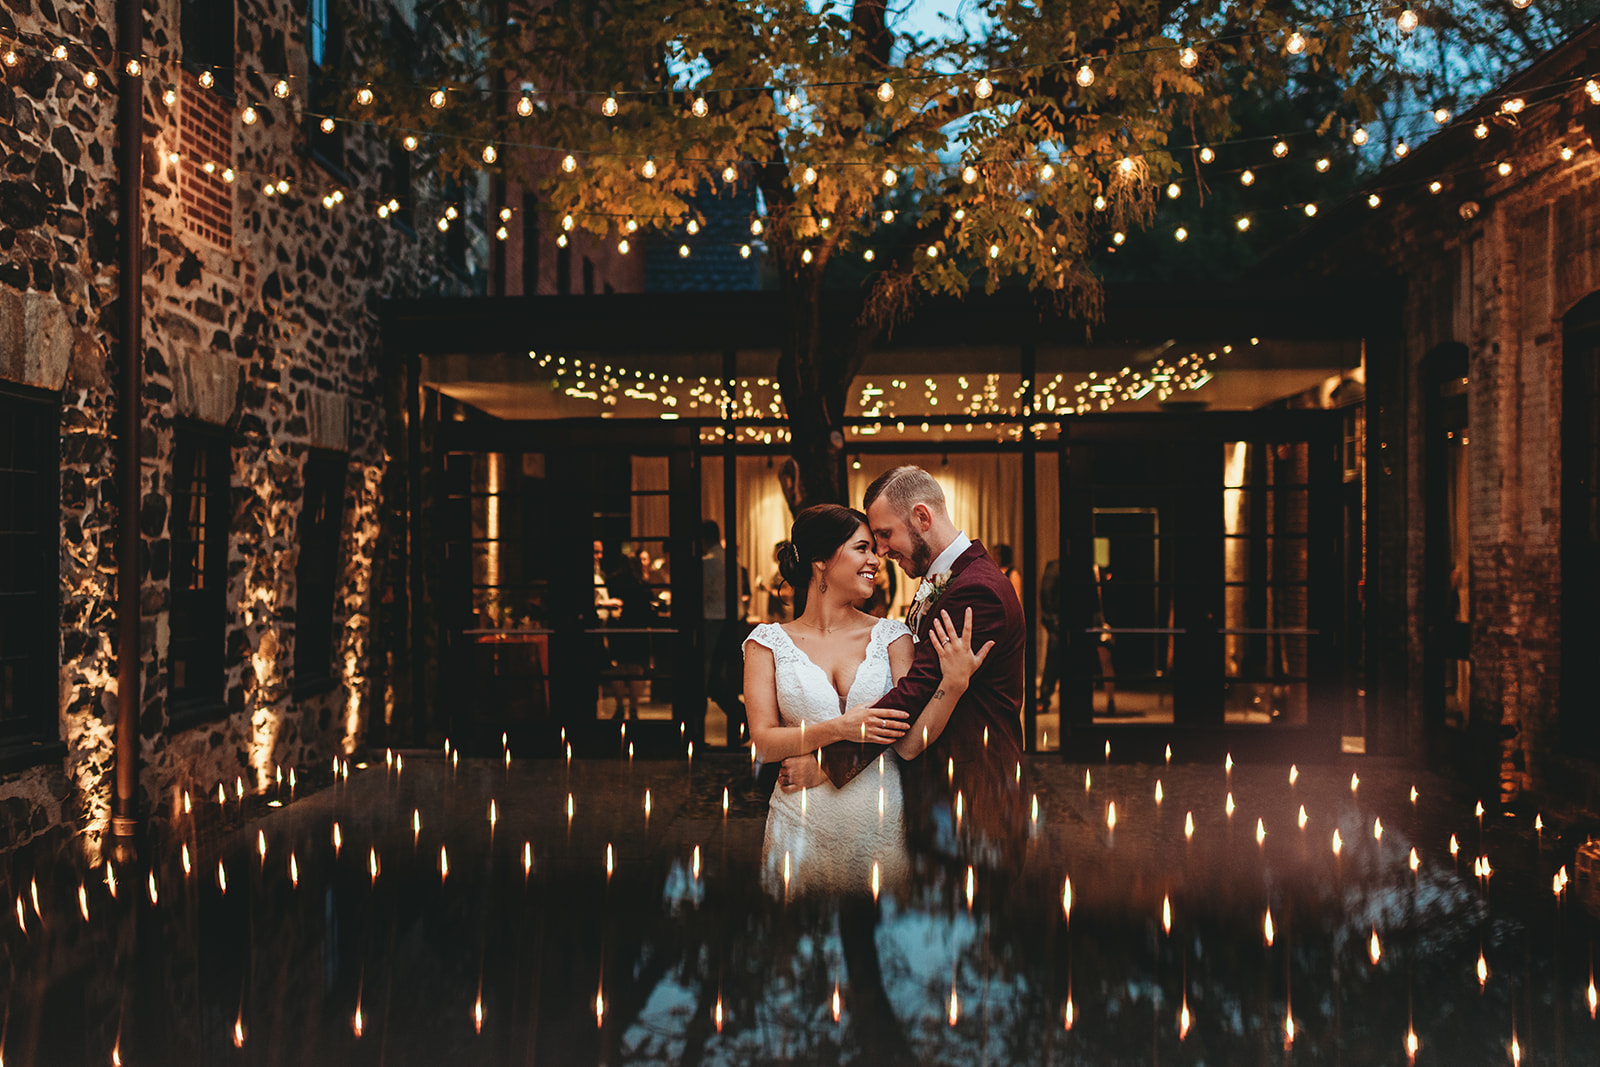 Baltimore wedding photographers captures bride and groom embracing under outdoor twinkle lights right after the sunsets for their Baltimore wedding